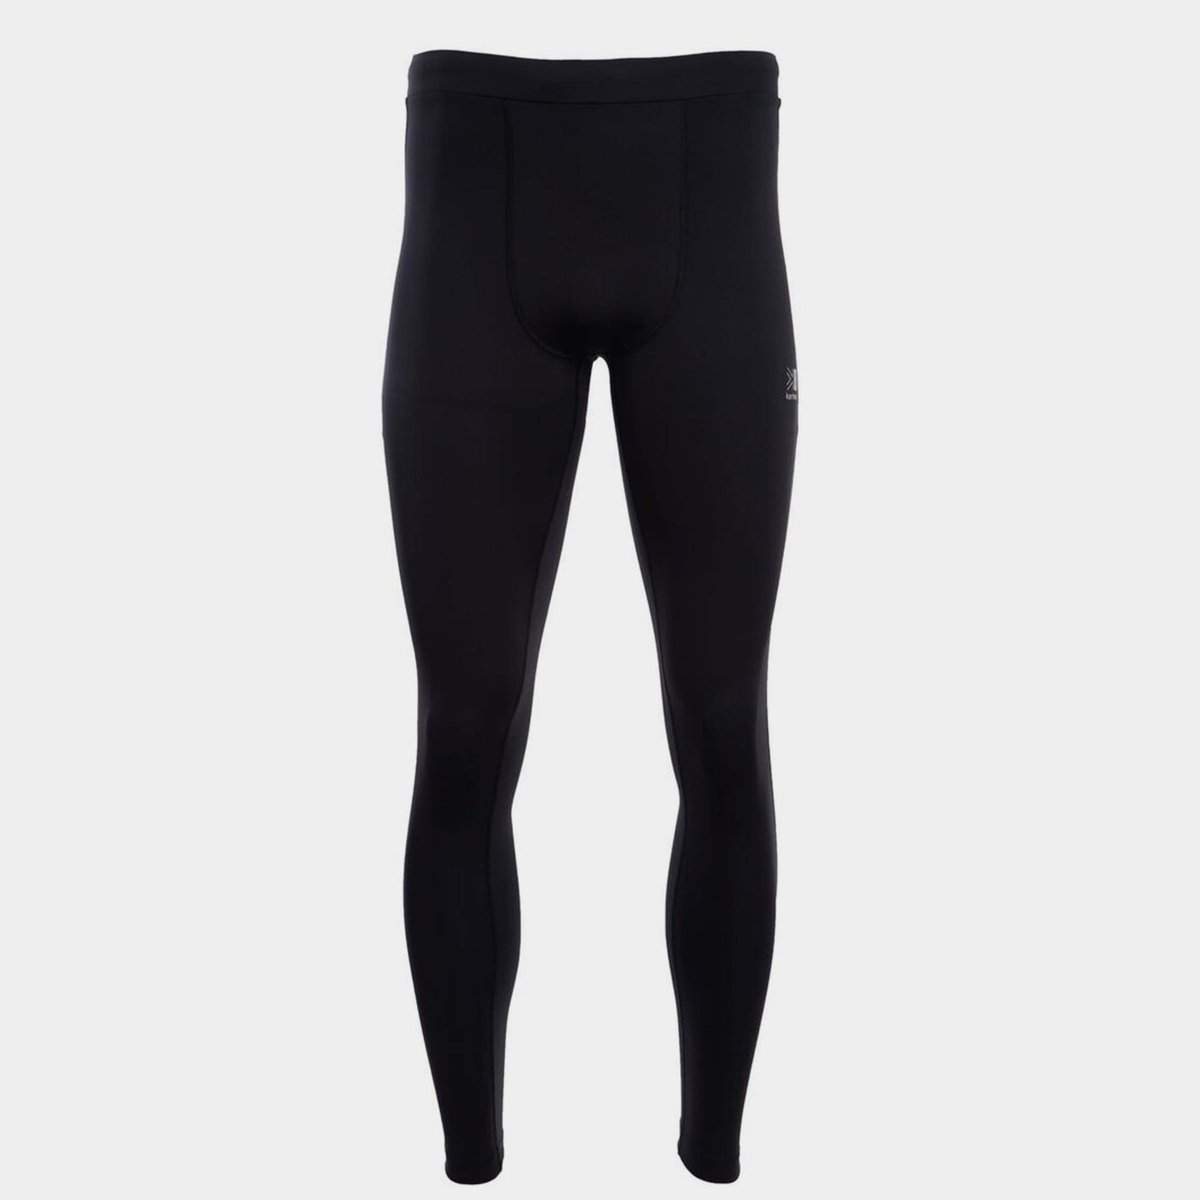 Karrimor Running Tights Ladies Black Pink in Siddipet at best price by  Adventure Point - Justdial